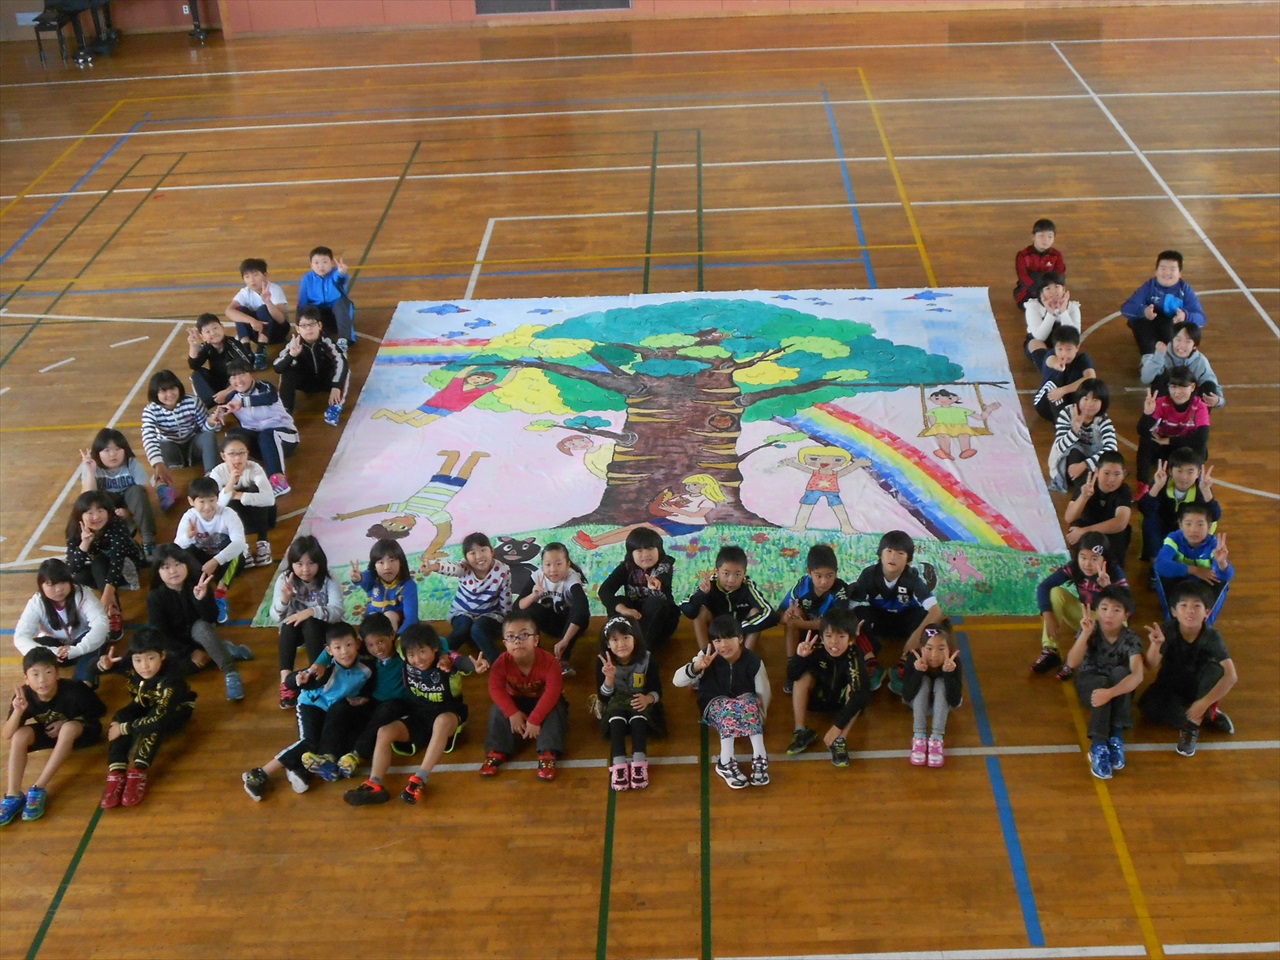 The Biggest Painting in the World 2020 Shibetsu City was completed